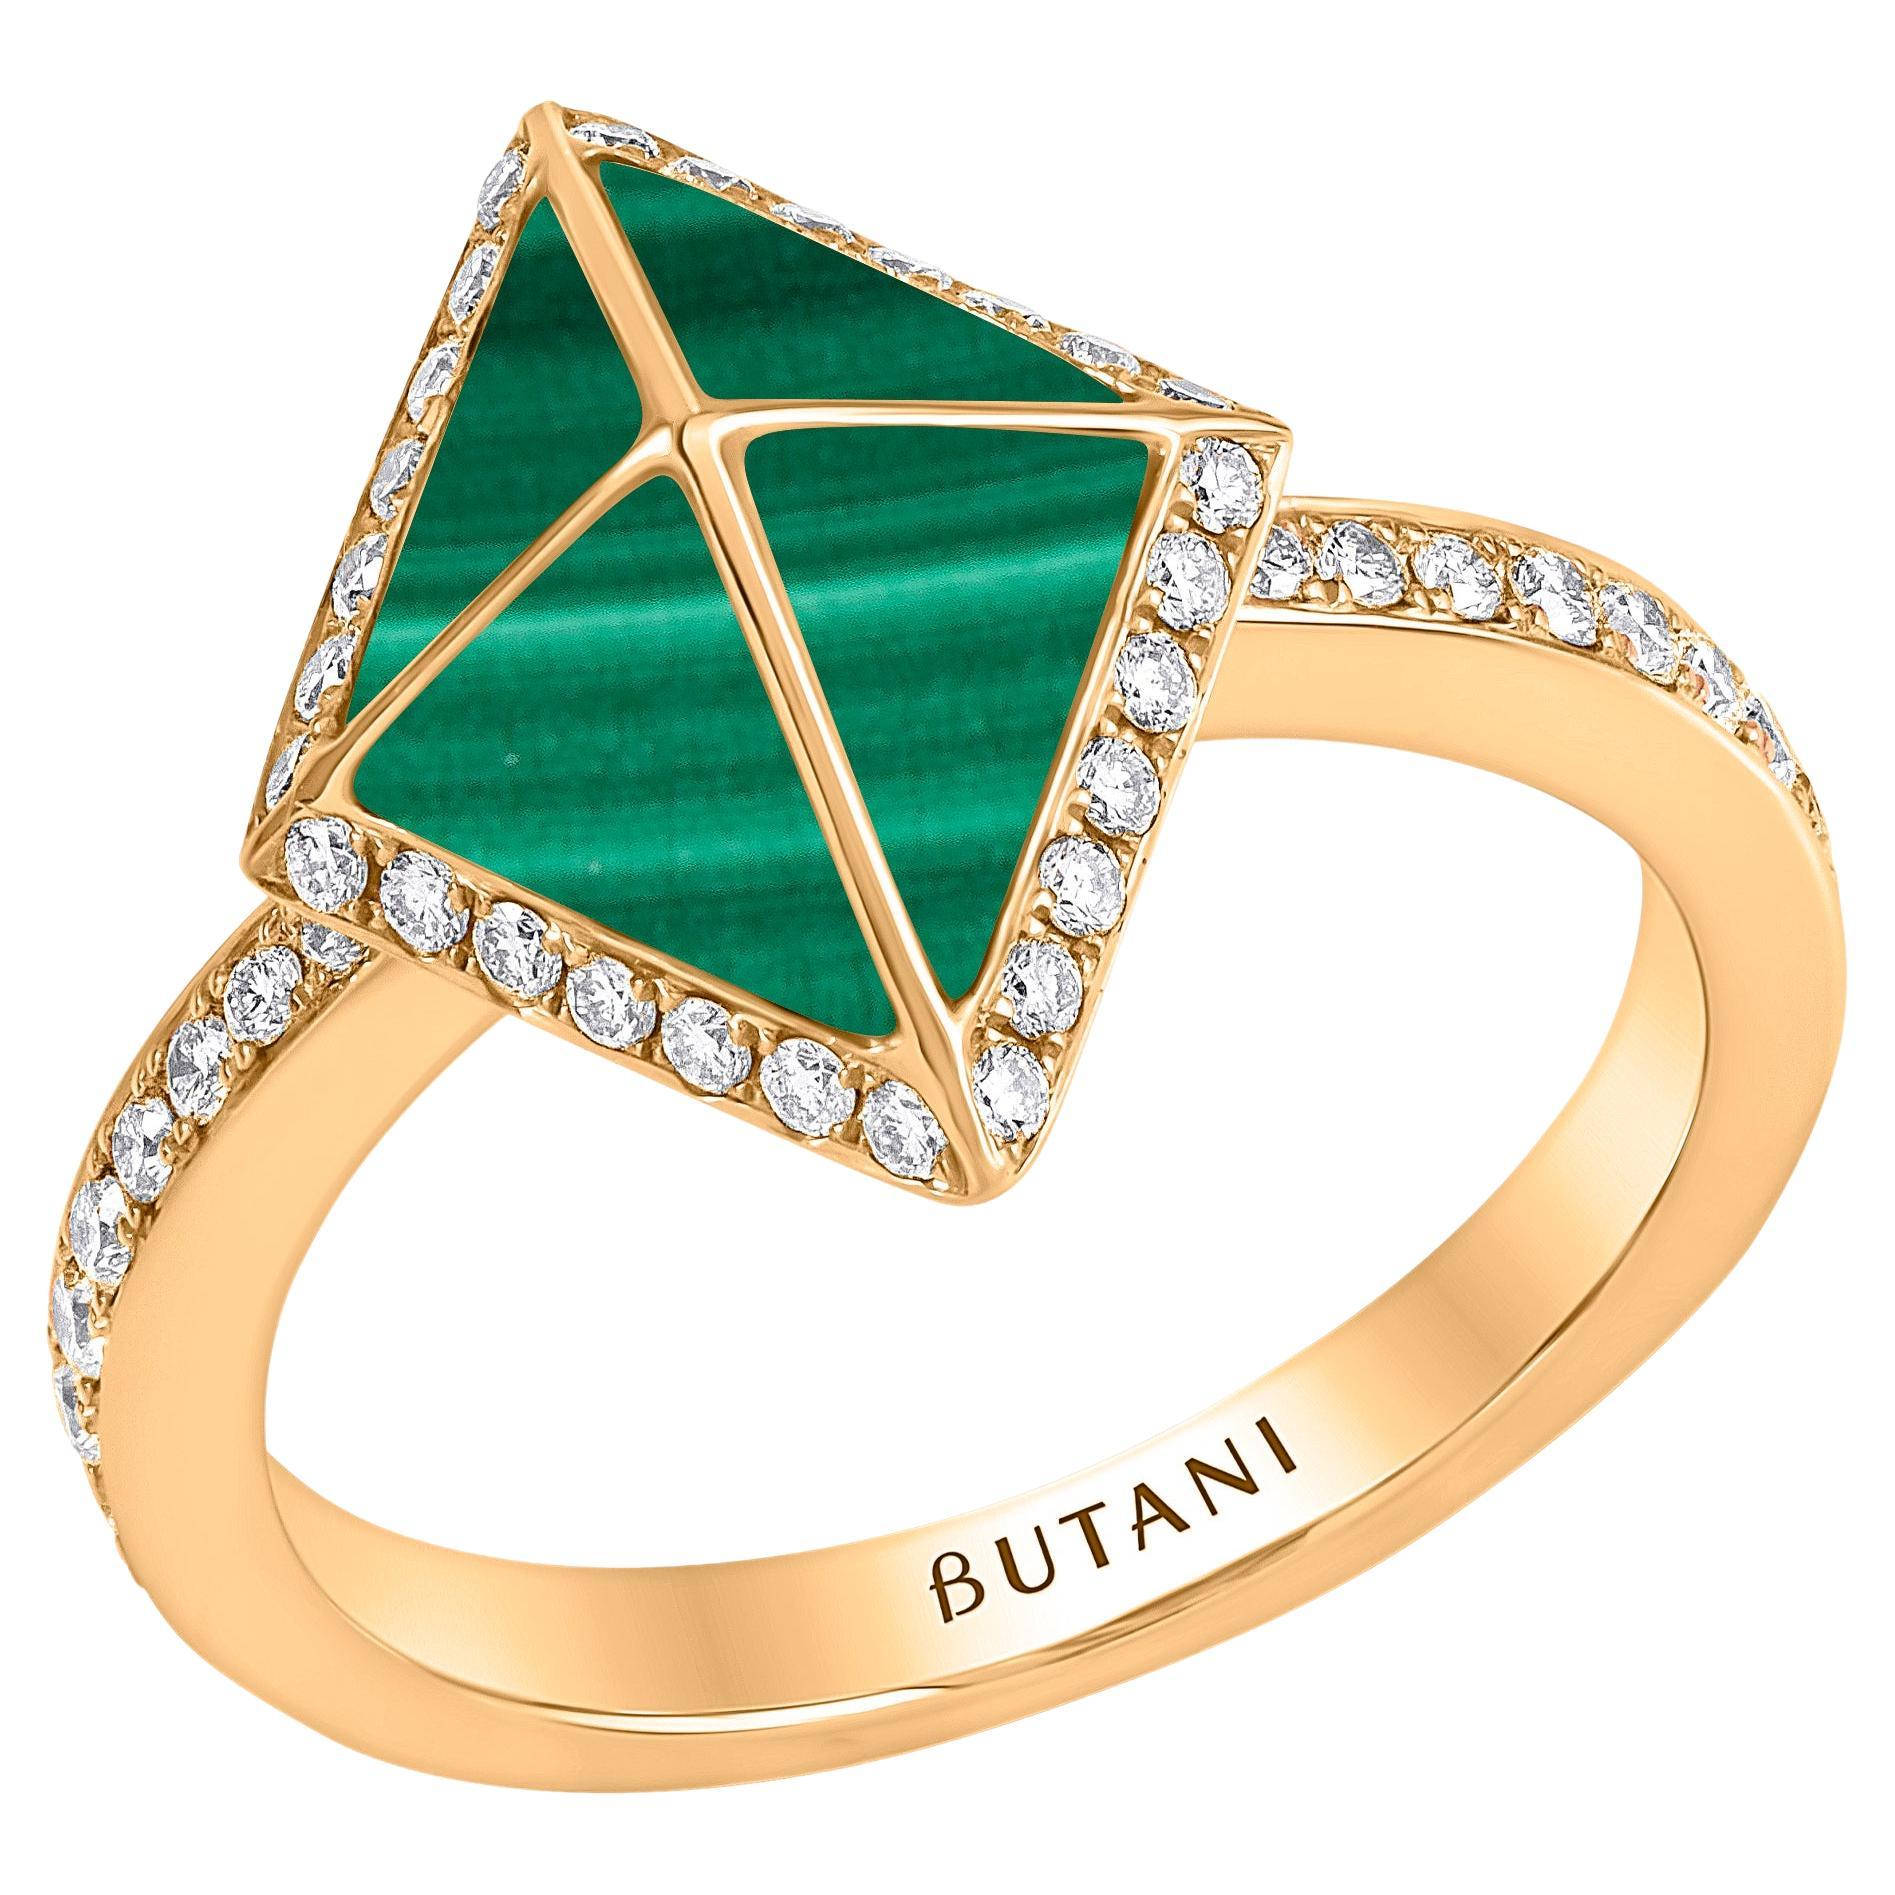 Tetra Zenith Ring with Malachite and Diamonds in 18k Yellow Gold